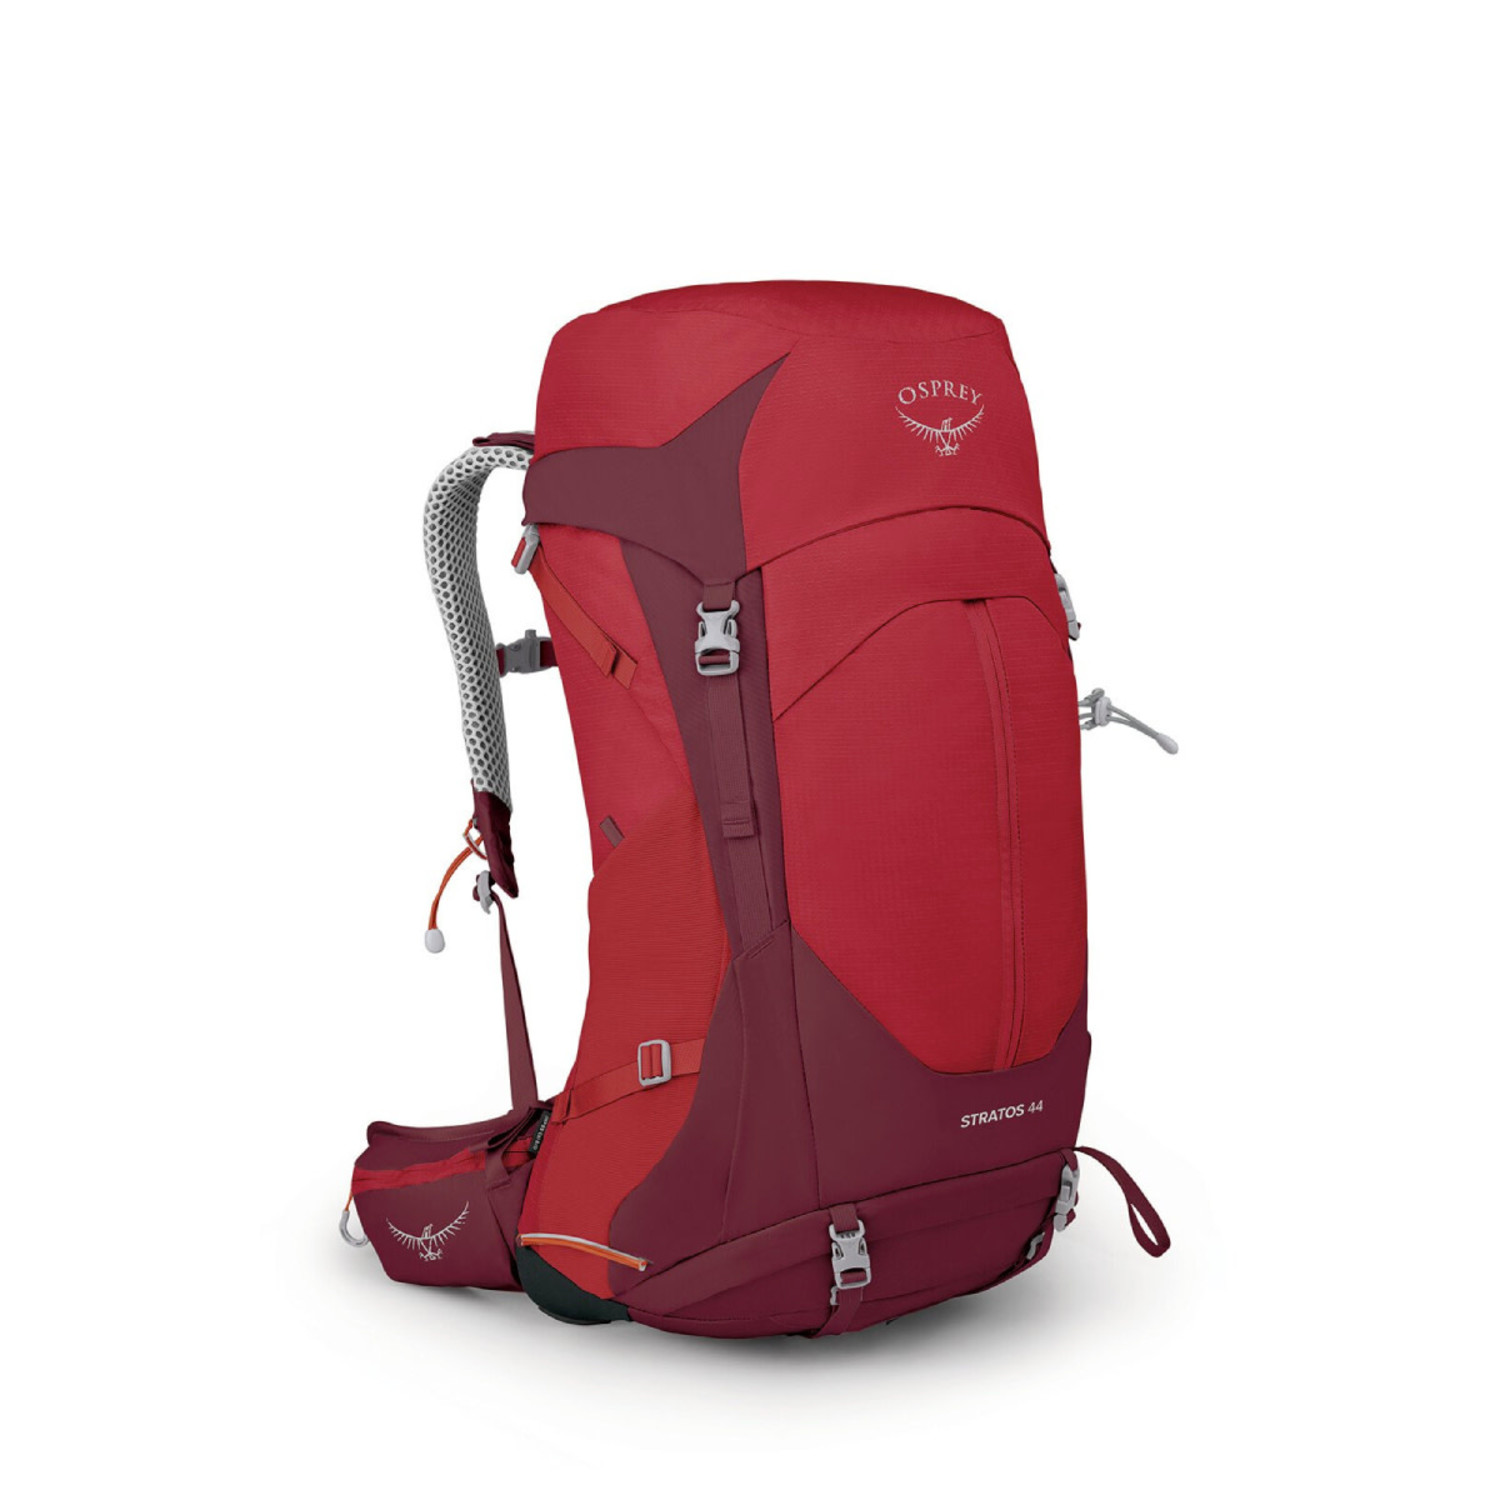 Osprey Stratos 44 Backpacking Pack - True Outdoors